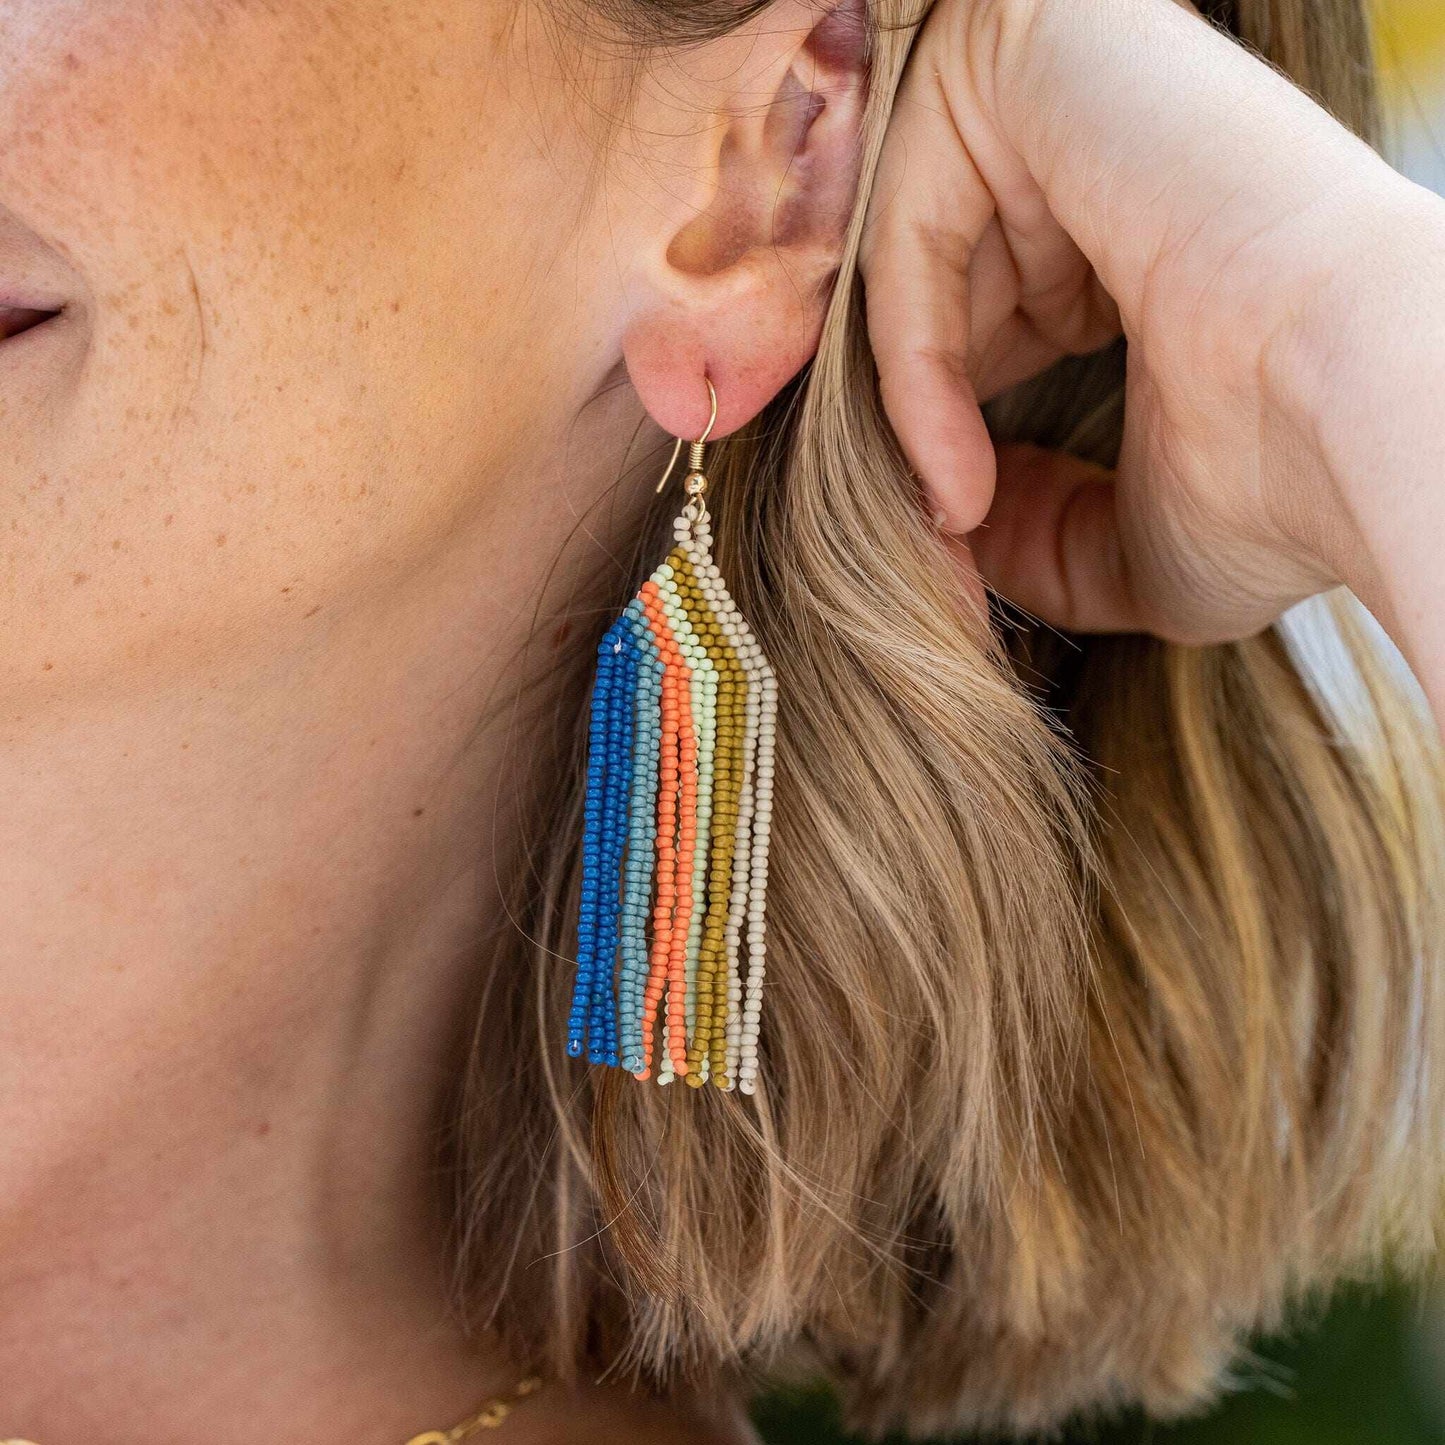 Ink+Alloy Striped Kite Earrings at Von Maur